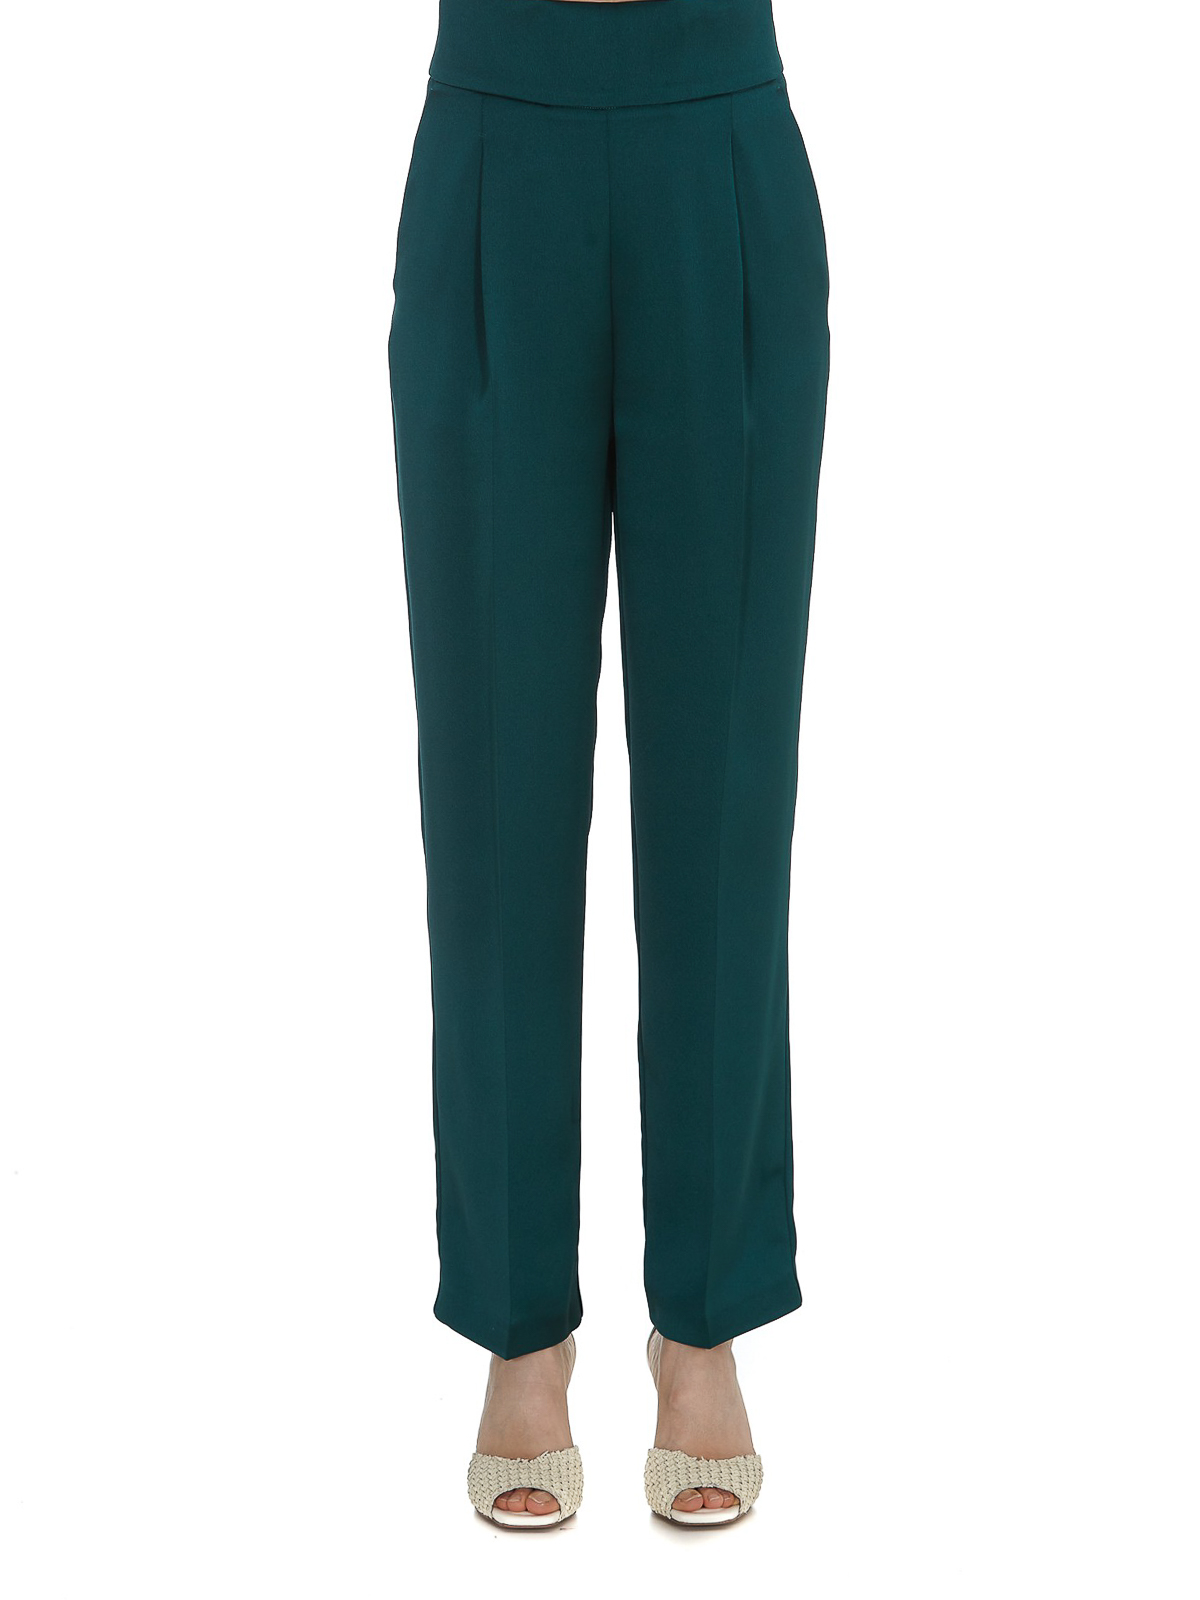 REDValentino Stretch Frisottine Pants With Darts Detail  Trousers for  Women  REDValentino EStore